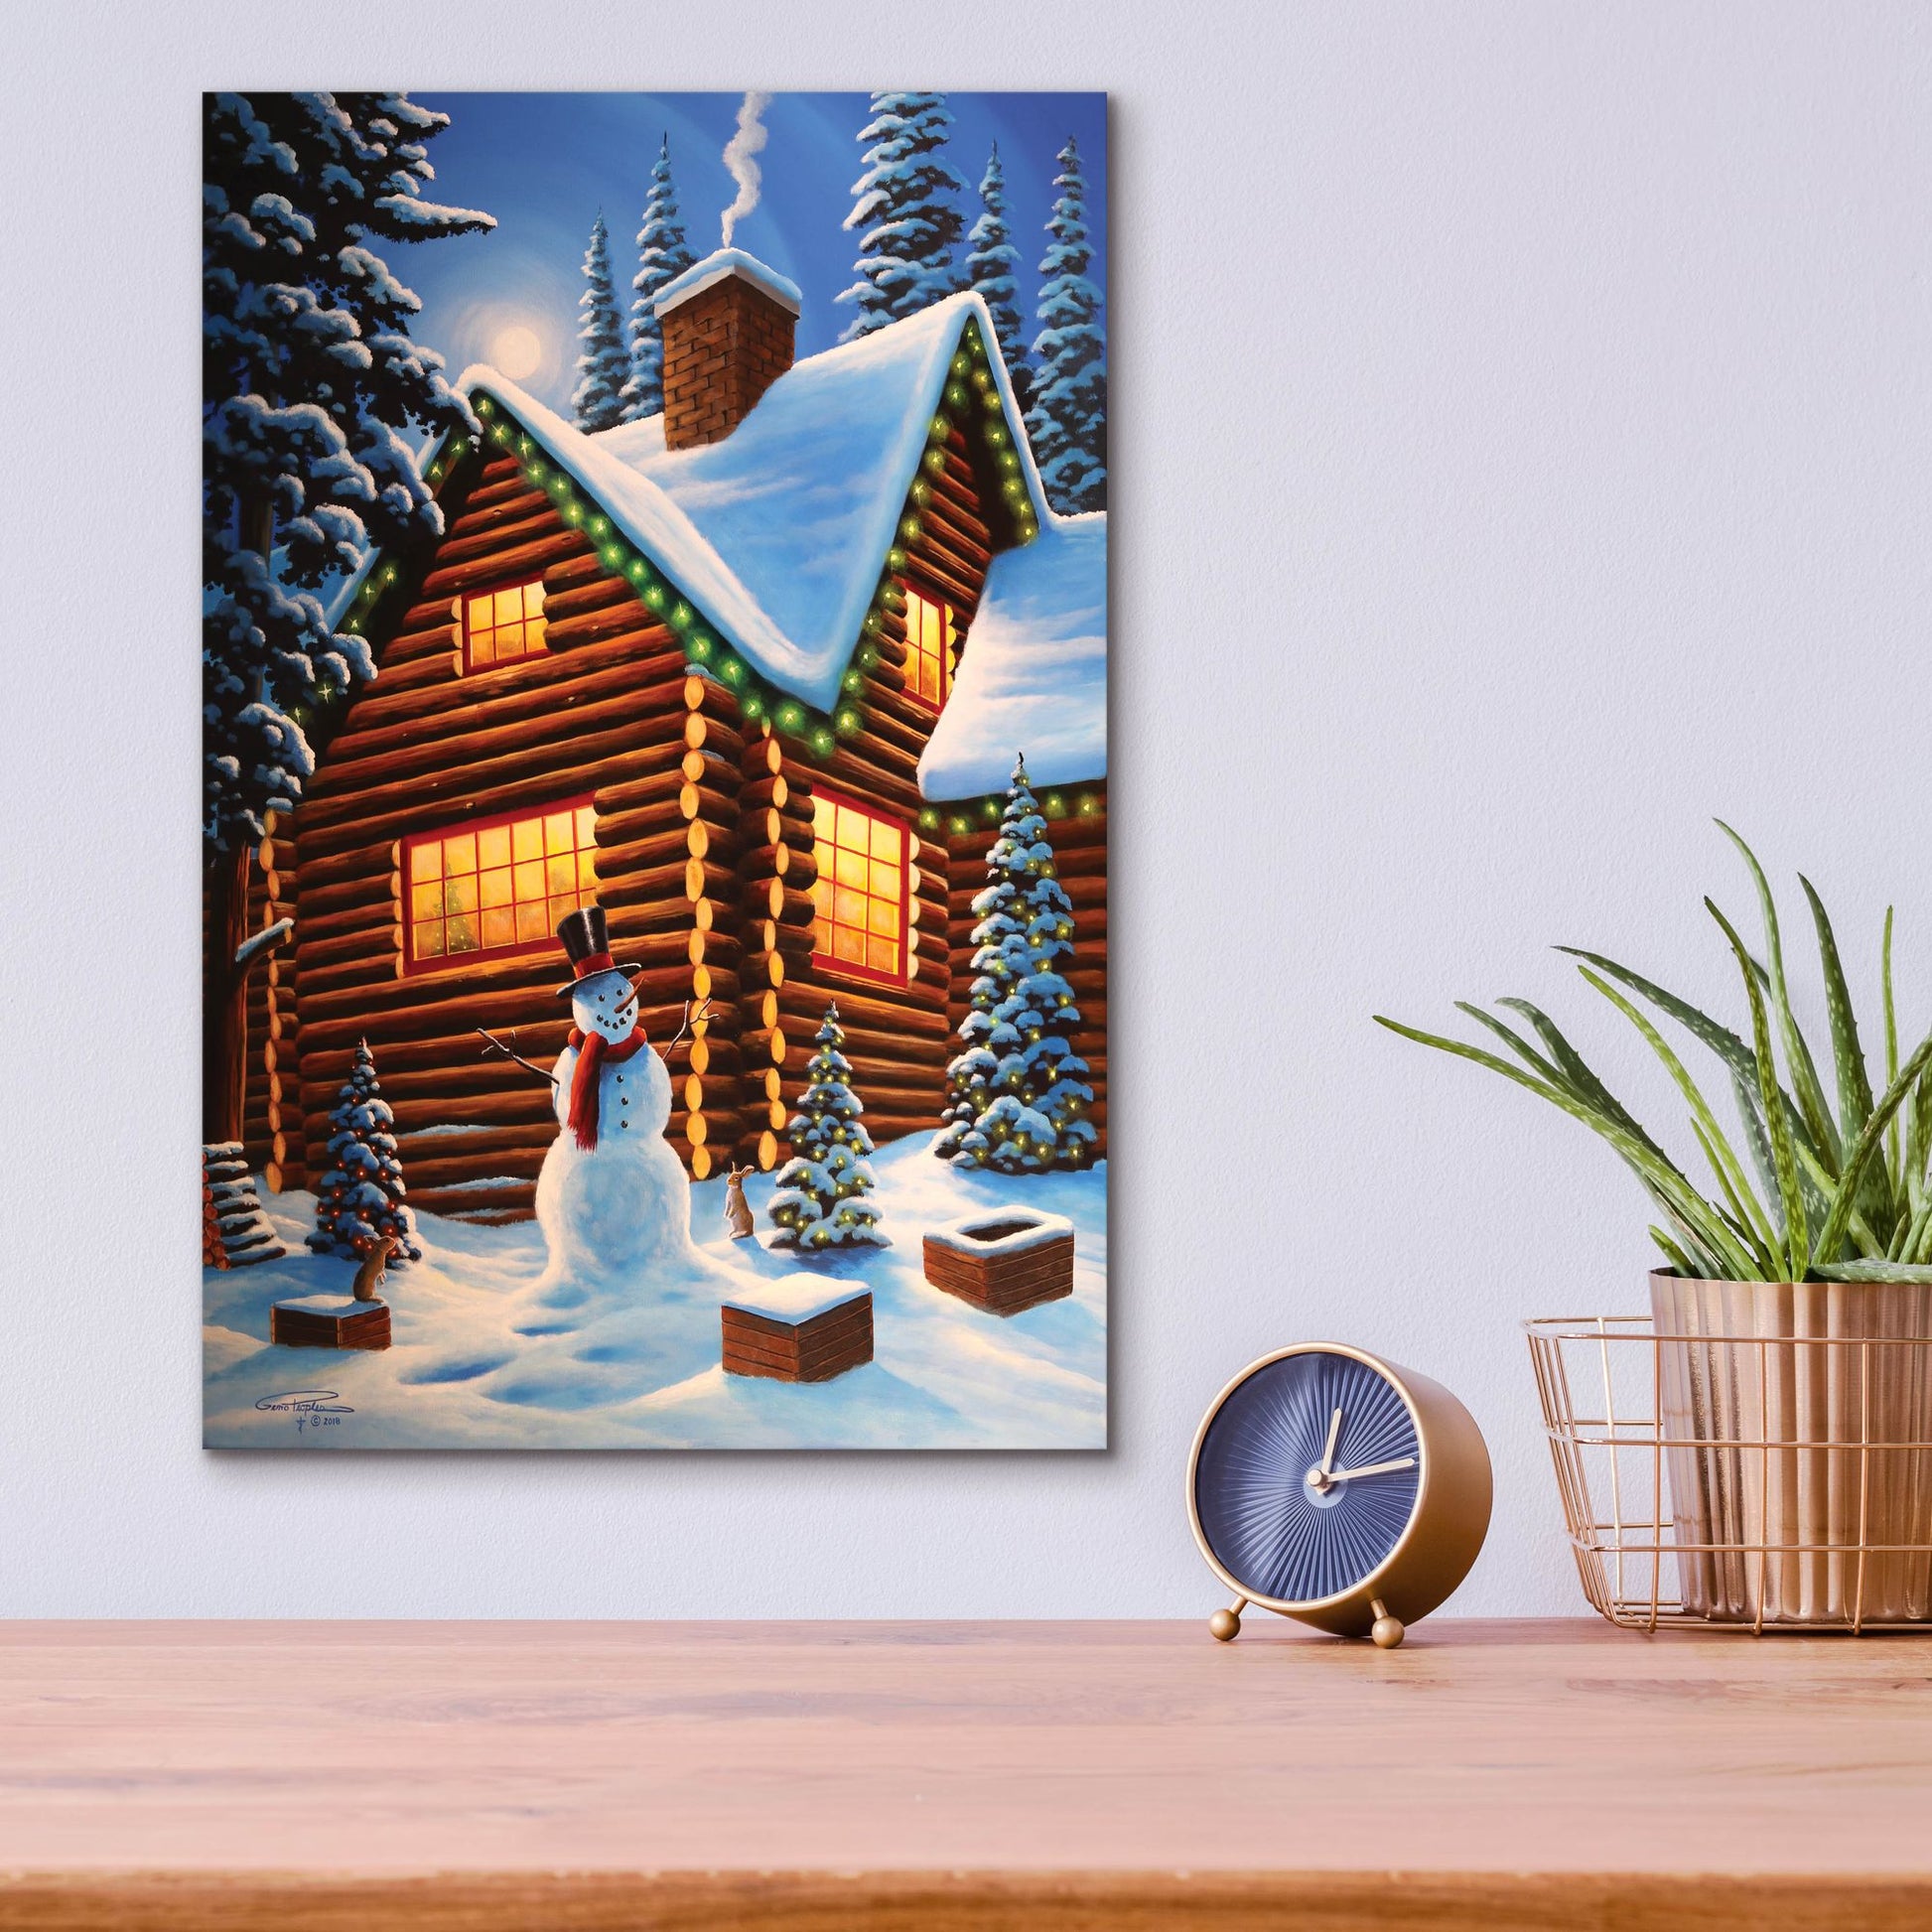 Epic Art 'Cozy Christmas' by Geno Peoples, Acrylic Glass Wall Art,12x16